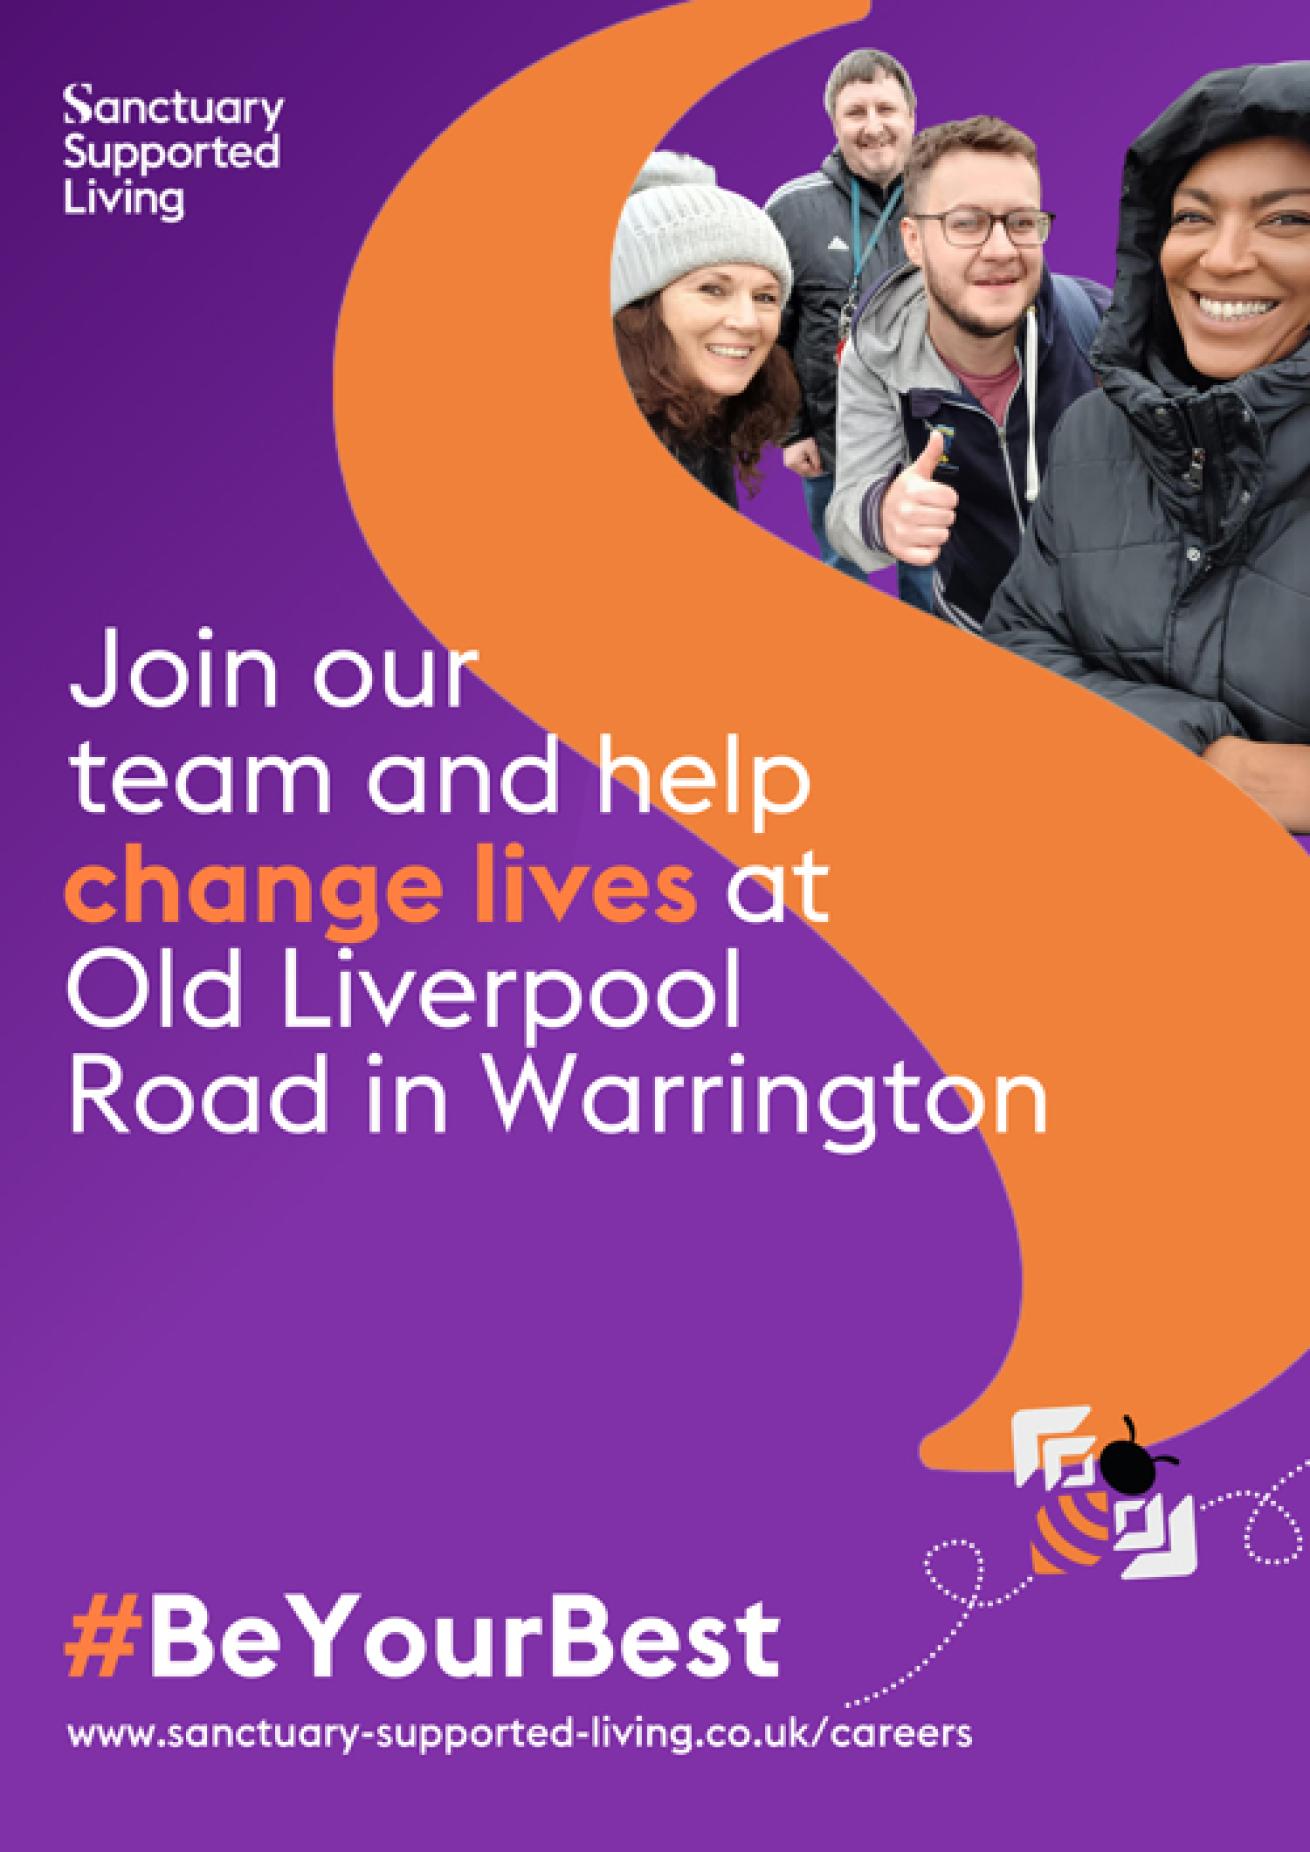 An image showing members of staff at Old Liverpool Road smiling and text that reads 'Join our team and help change lives at Old Liverpool Road in Warrington'